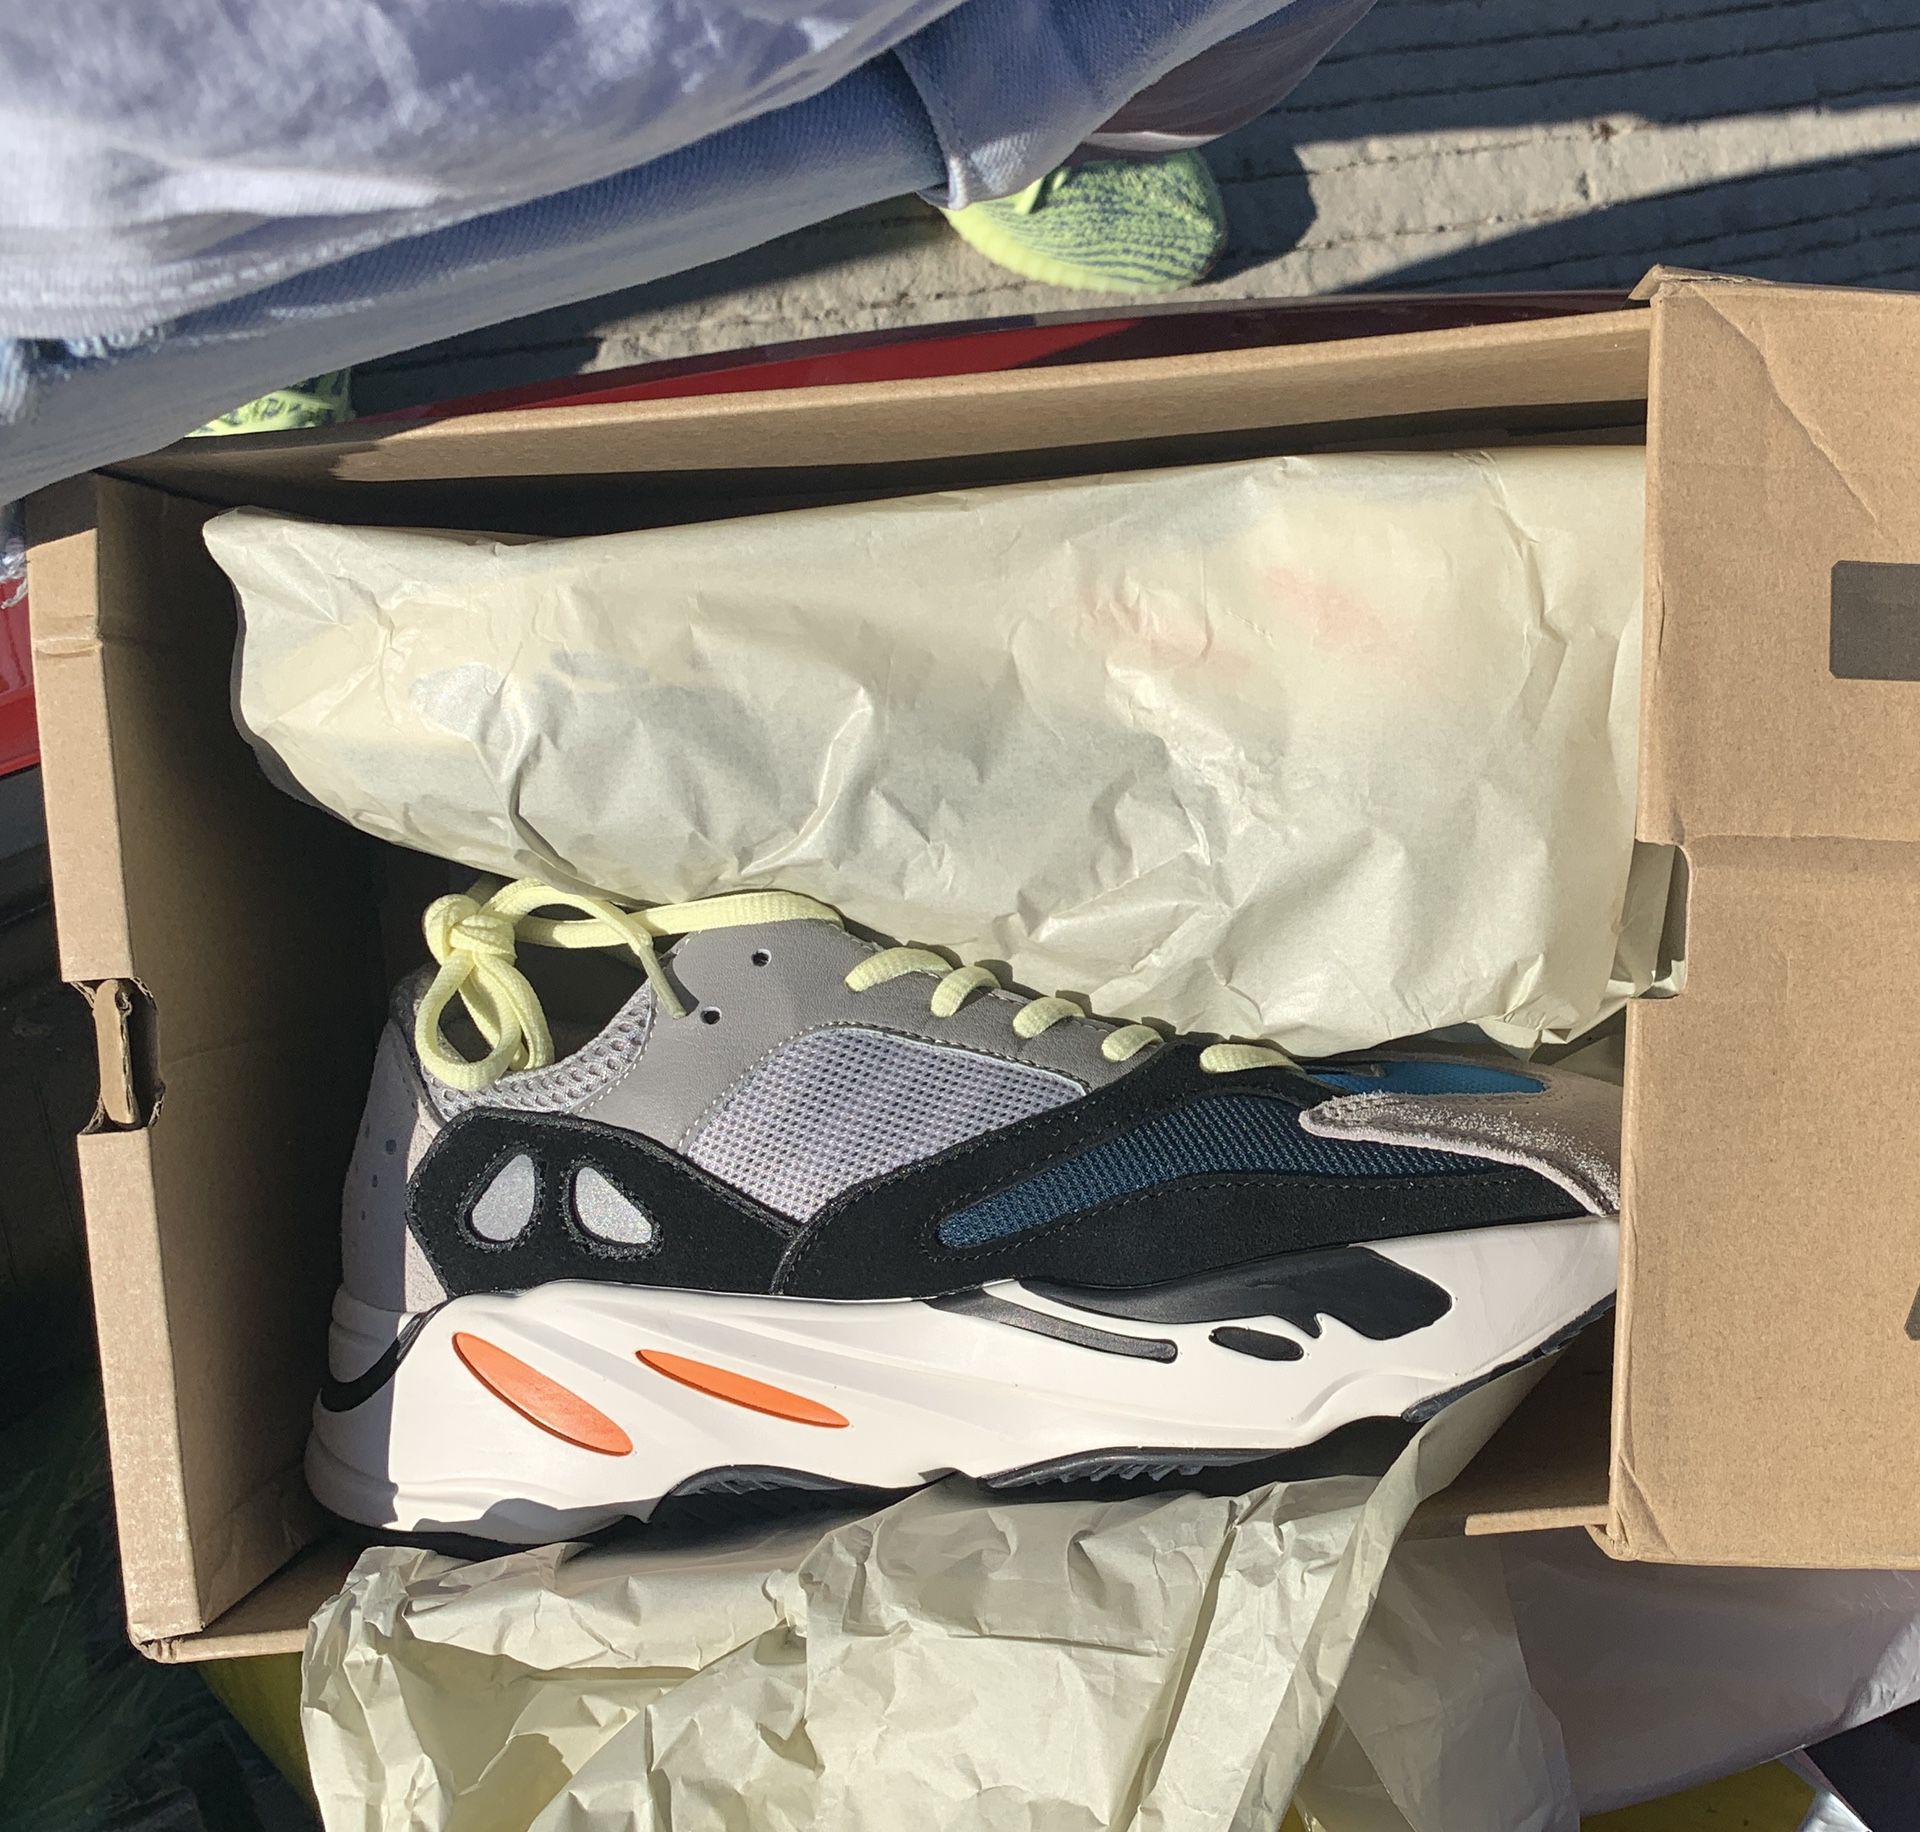 Yeezy wave runners (Size 10.5)